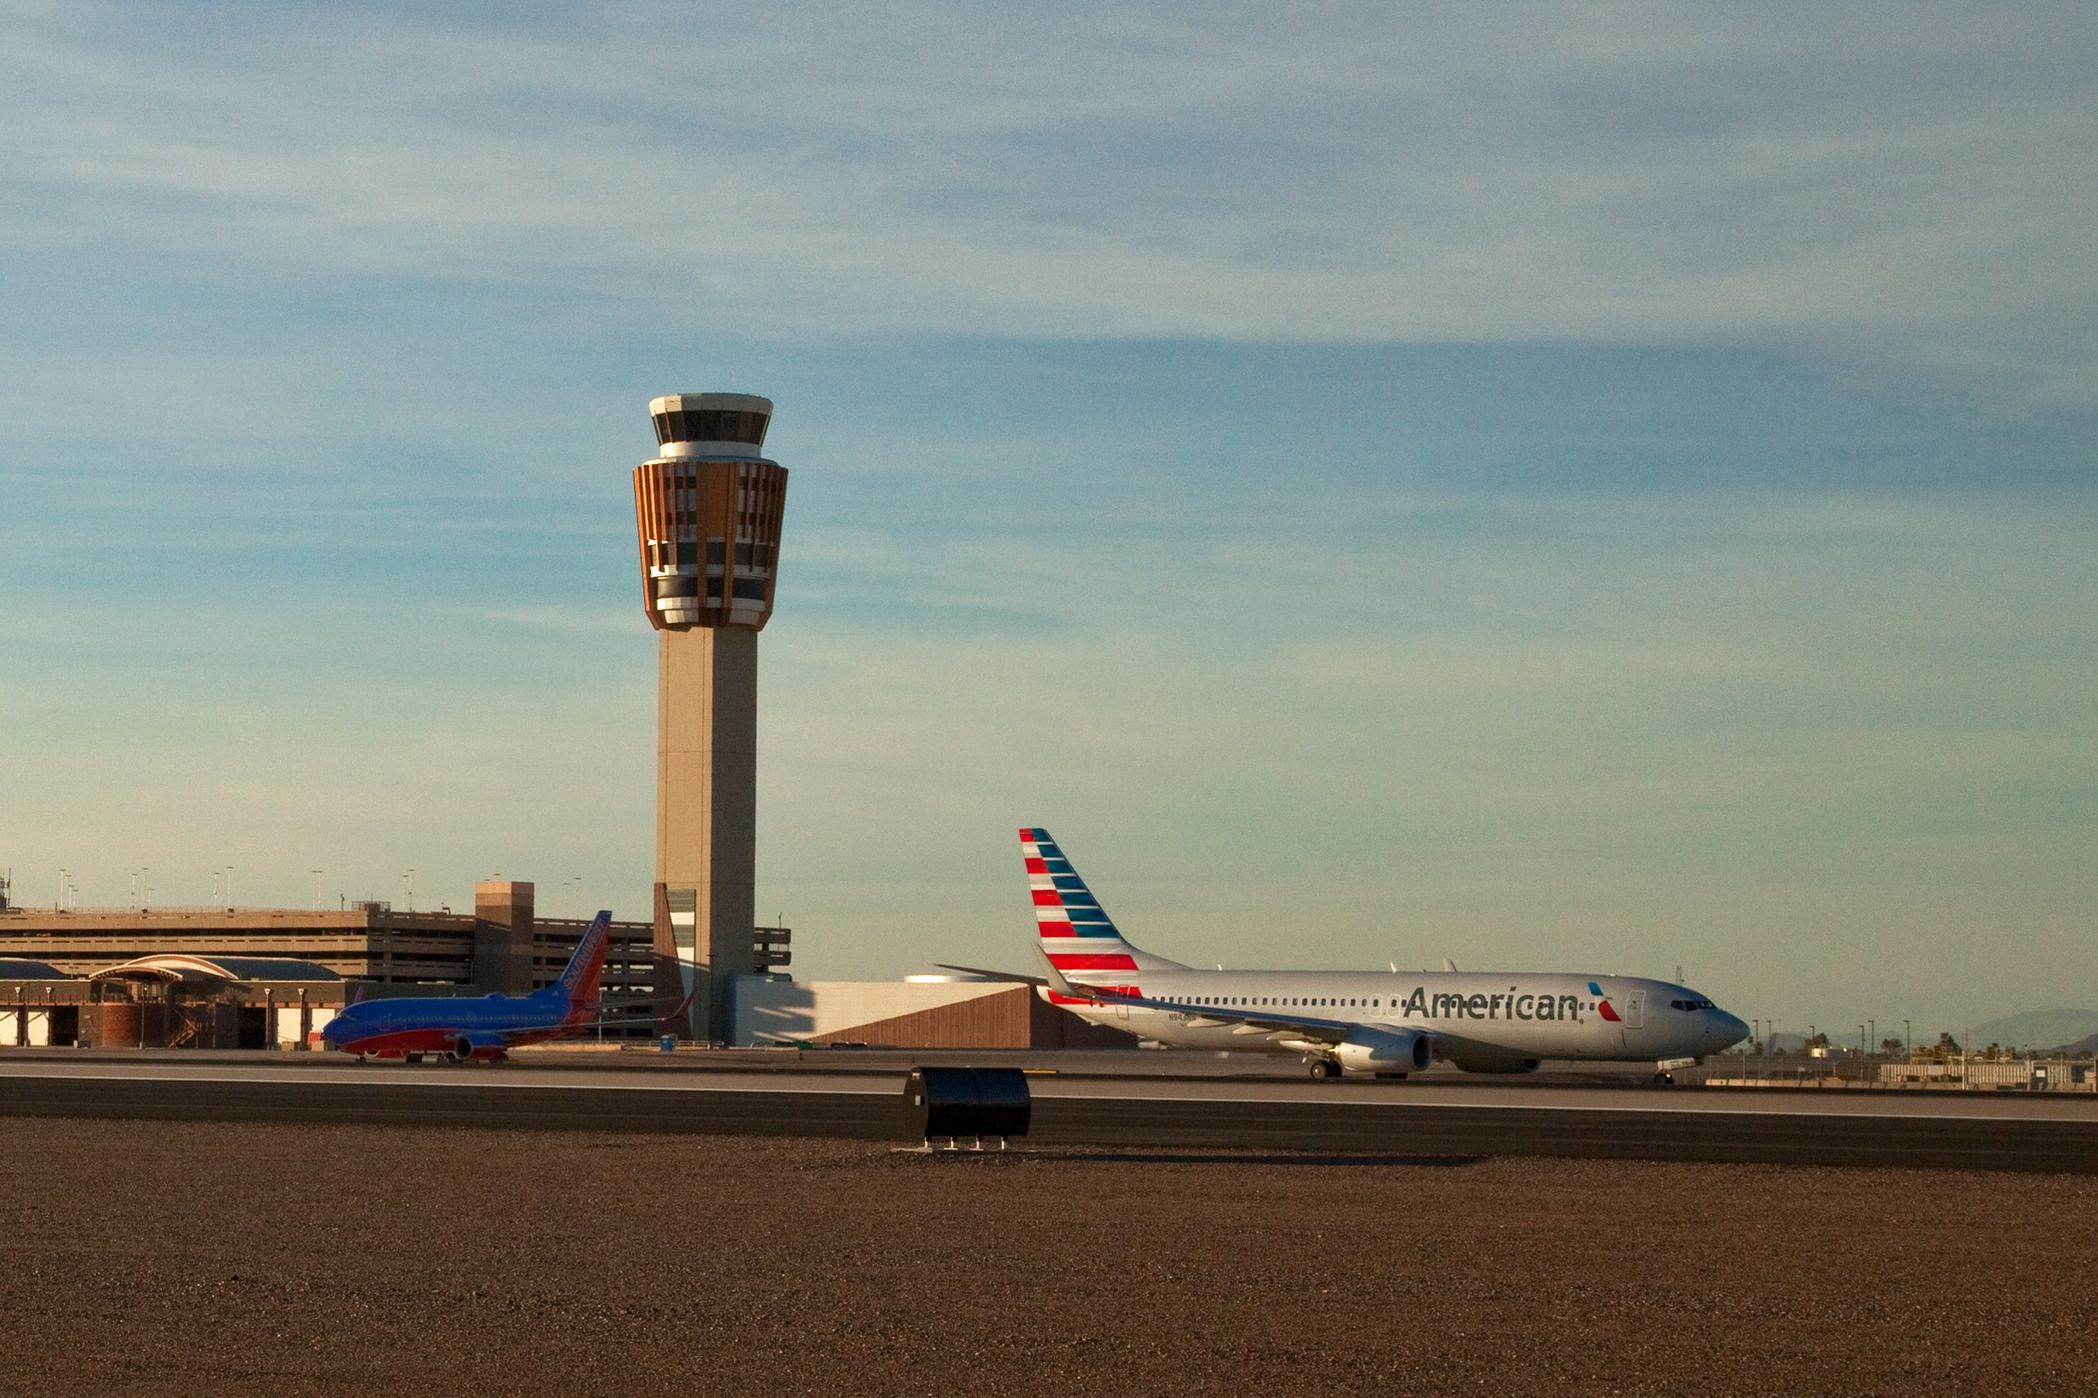 American Airlines and Southwest Airlines aircraft on the apron at Phoenix Sky Harbor International Airport.